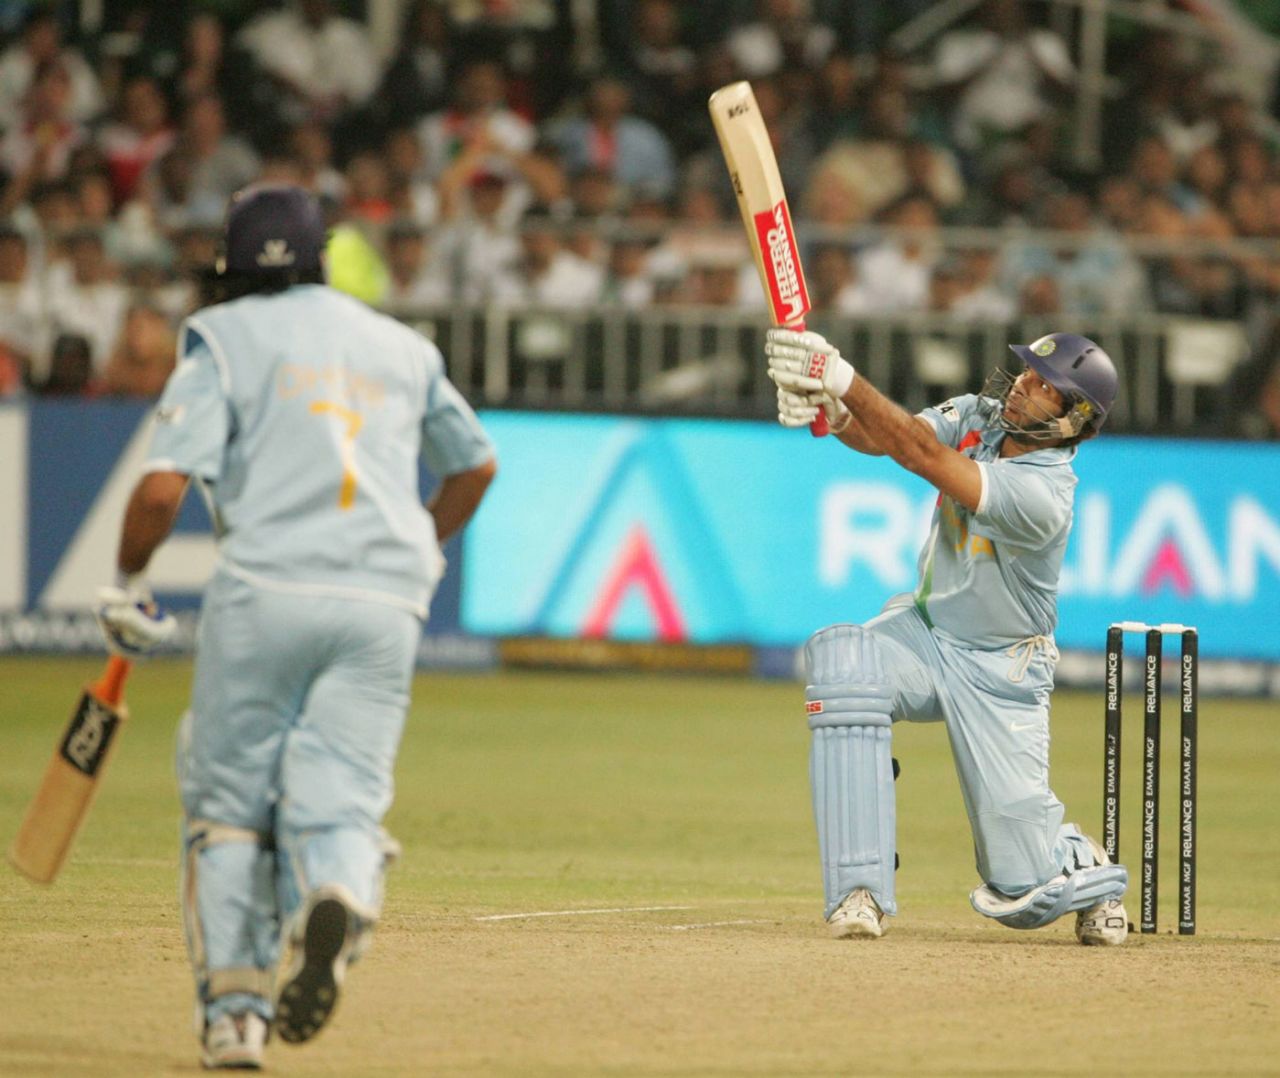 MS Dhoni looks on as Yuvraj Singh sends one soaring into the stands, England v India, Group E, ICC World Twenty20, Durban, September 19, 2007